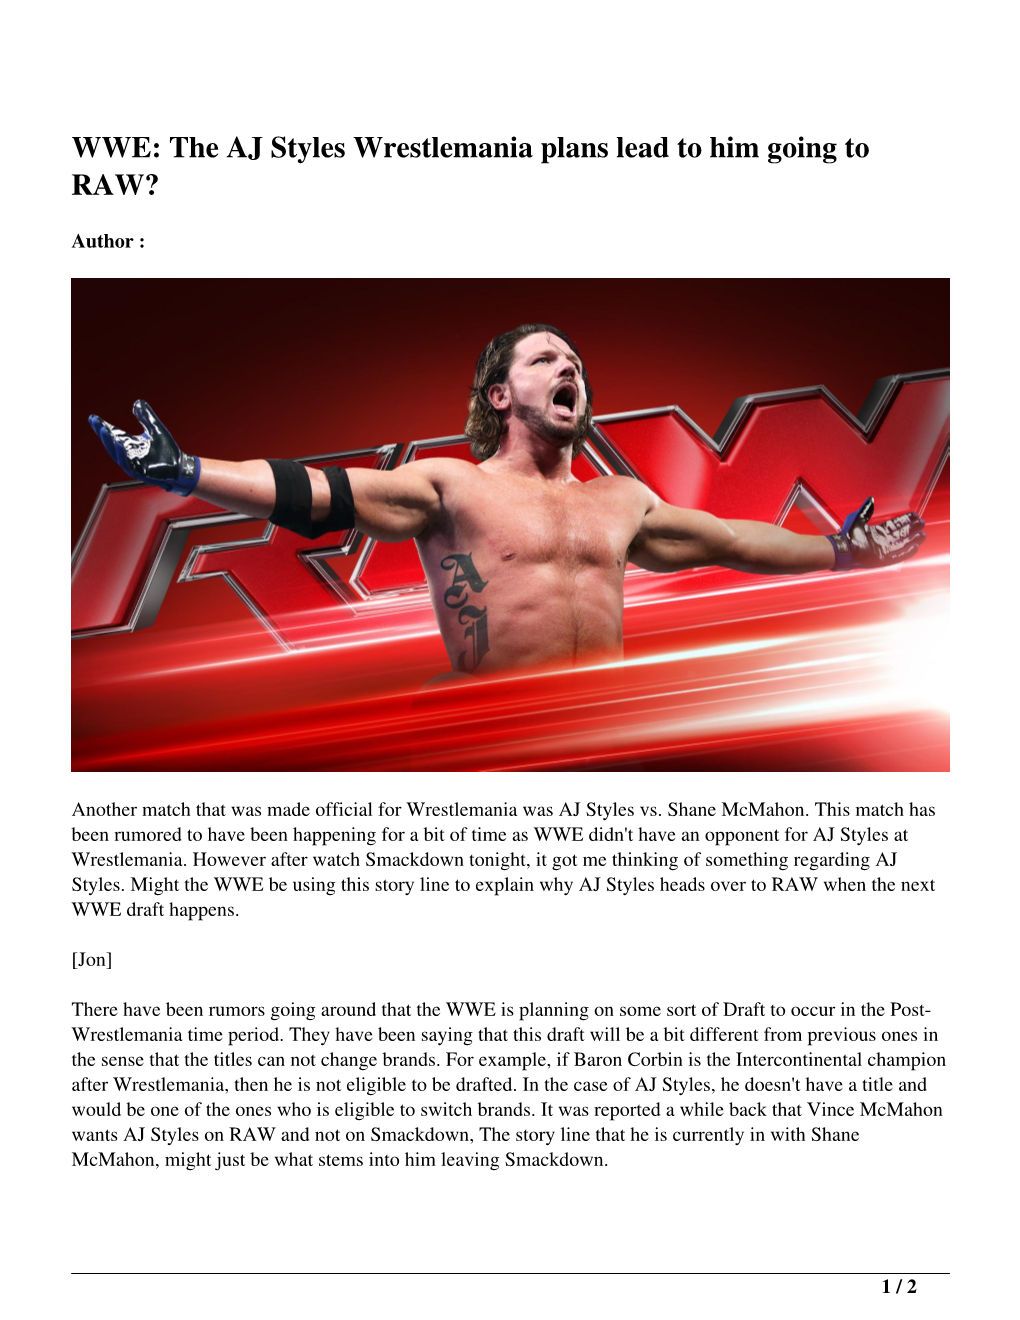 WWE: the AJ Styles Wrestlemania Plans Lead to Him Going to RAW?